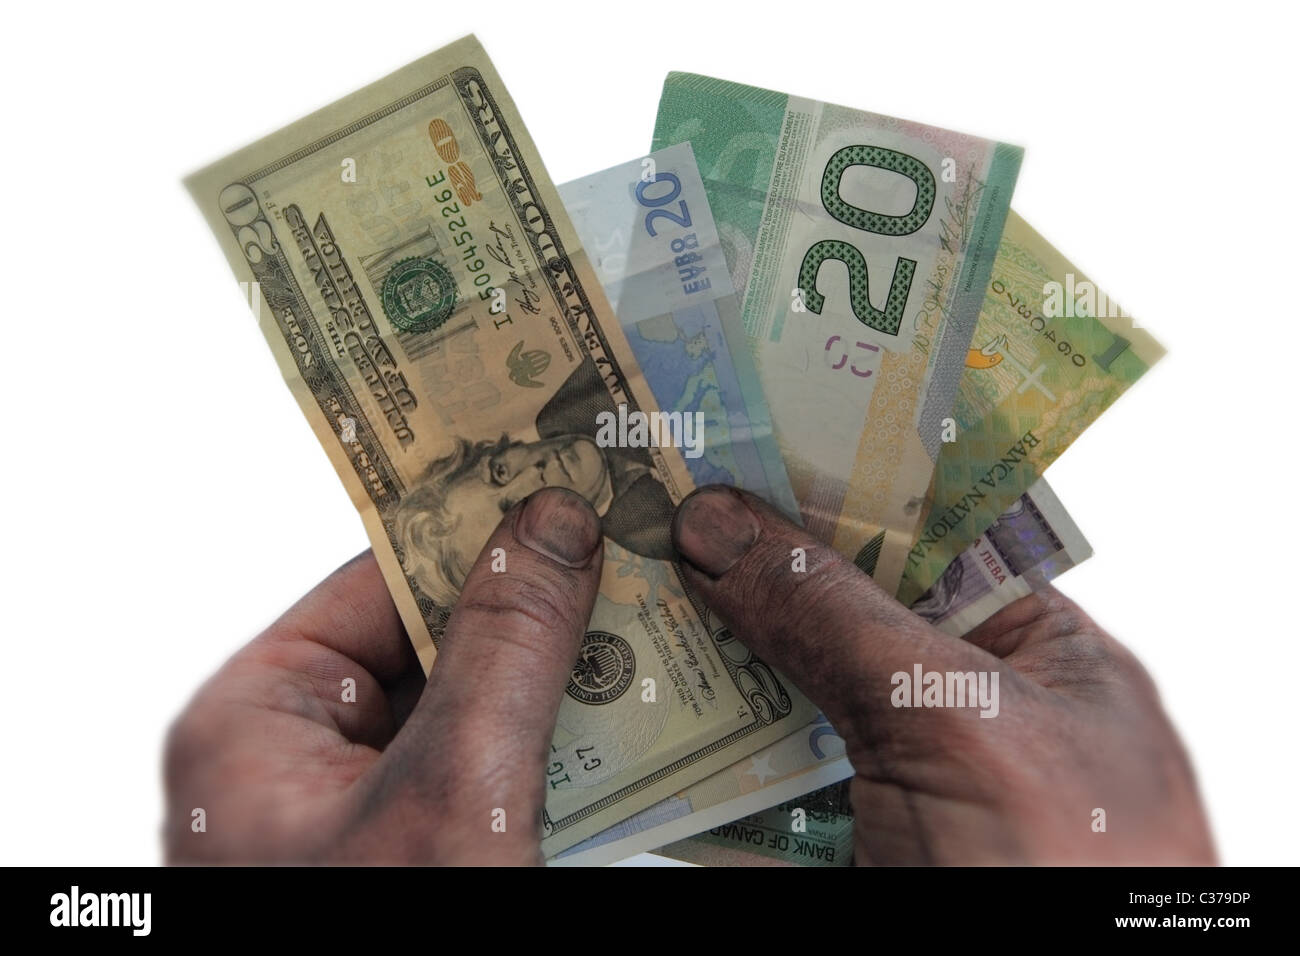 dirty hands holding different bank notes.  Hands are isolated on white background. Space for copy. Stock Photo